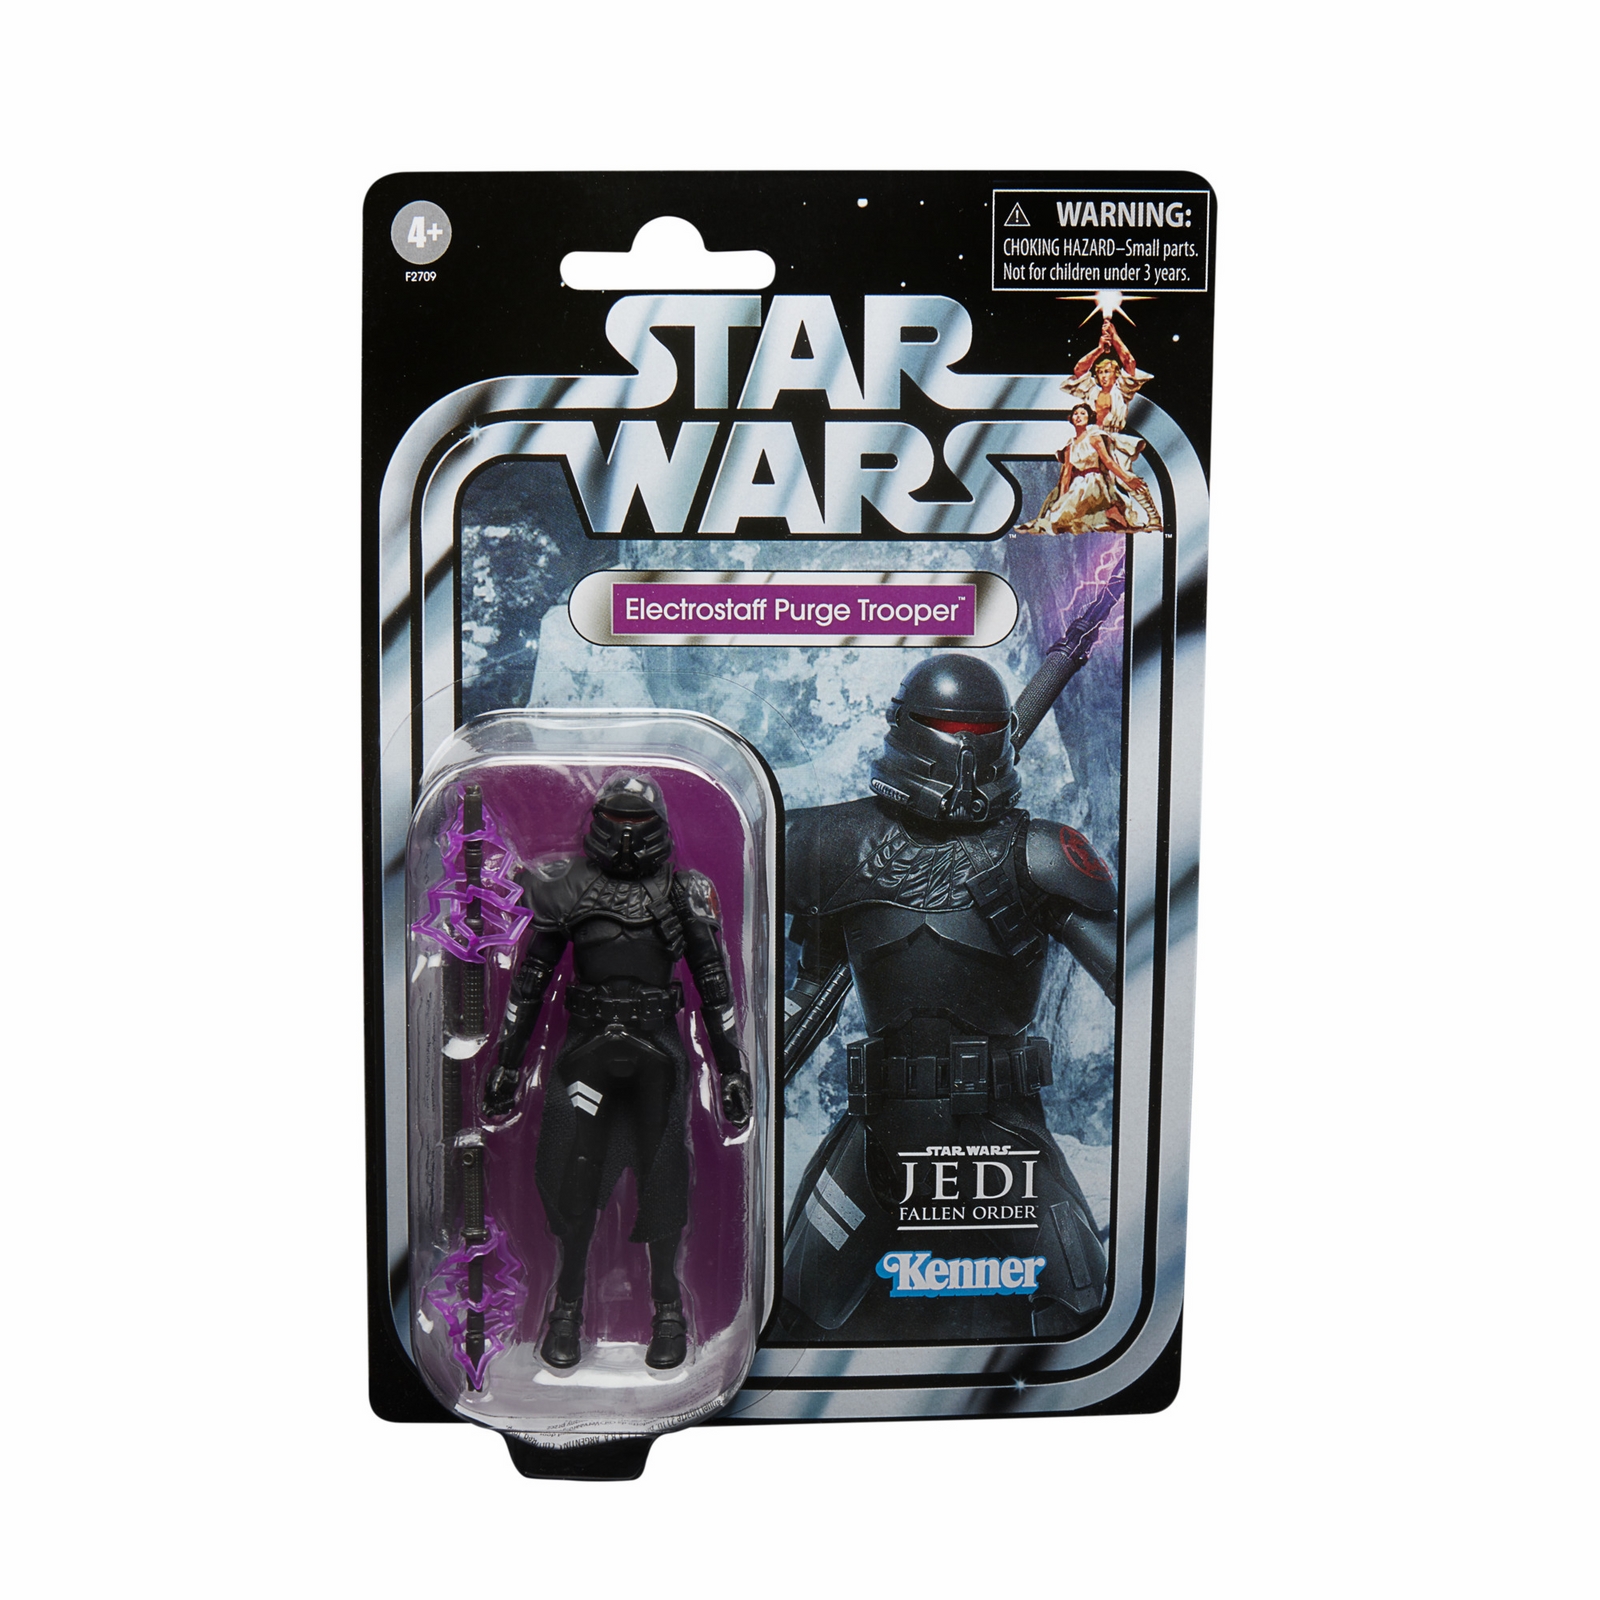 STAR WARS THE VINTAGE COLLECTION GAMING GREATS 3.75-INCH PURGE STORMTOOPER Figure (2).jpg